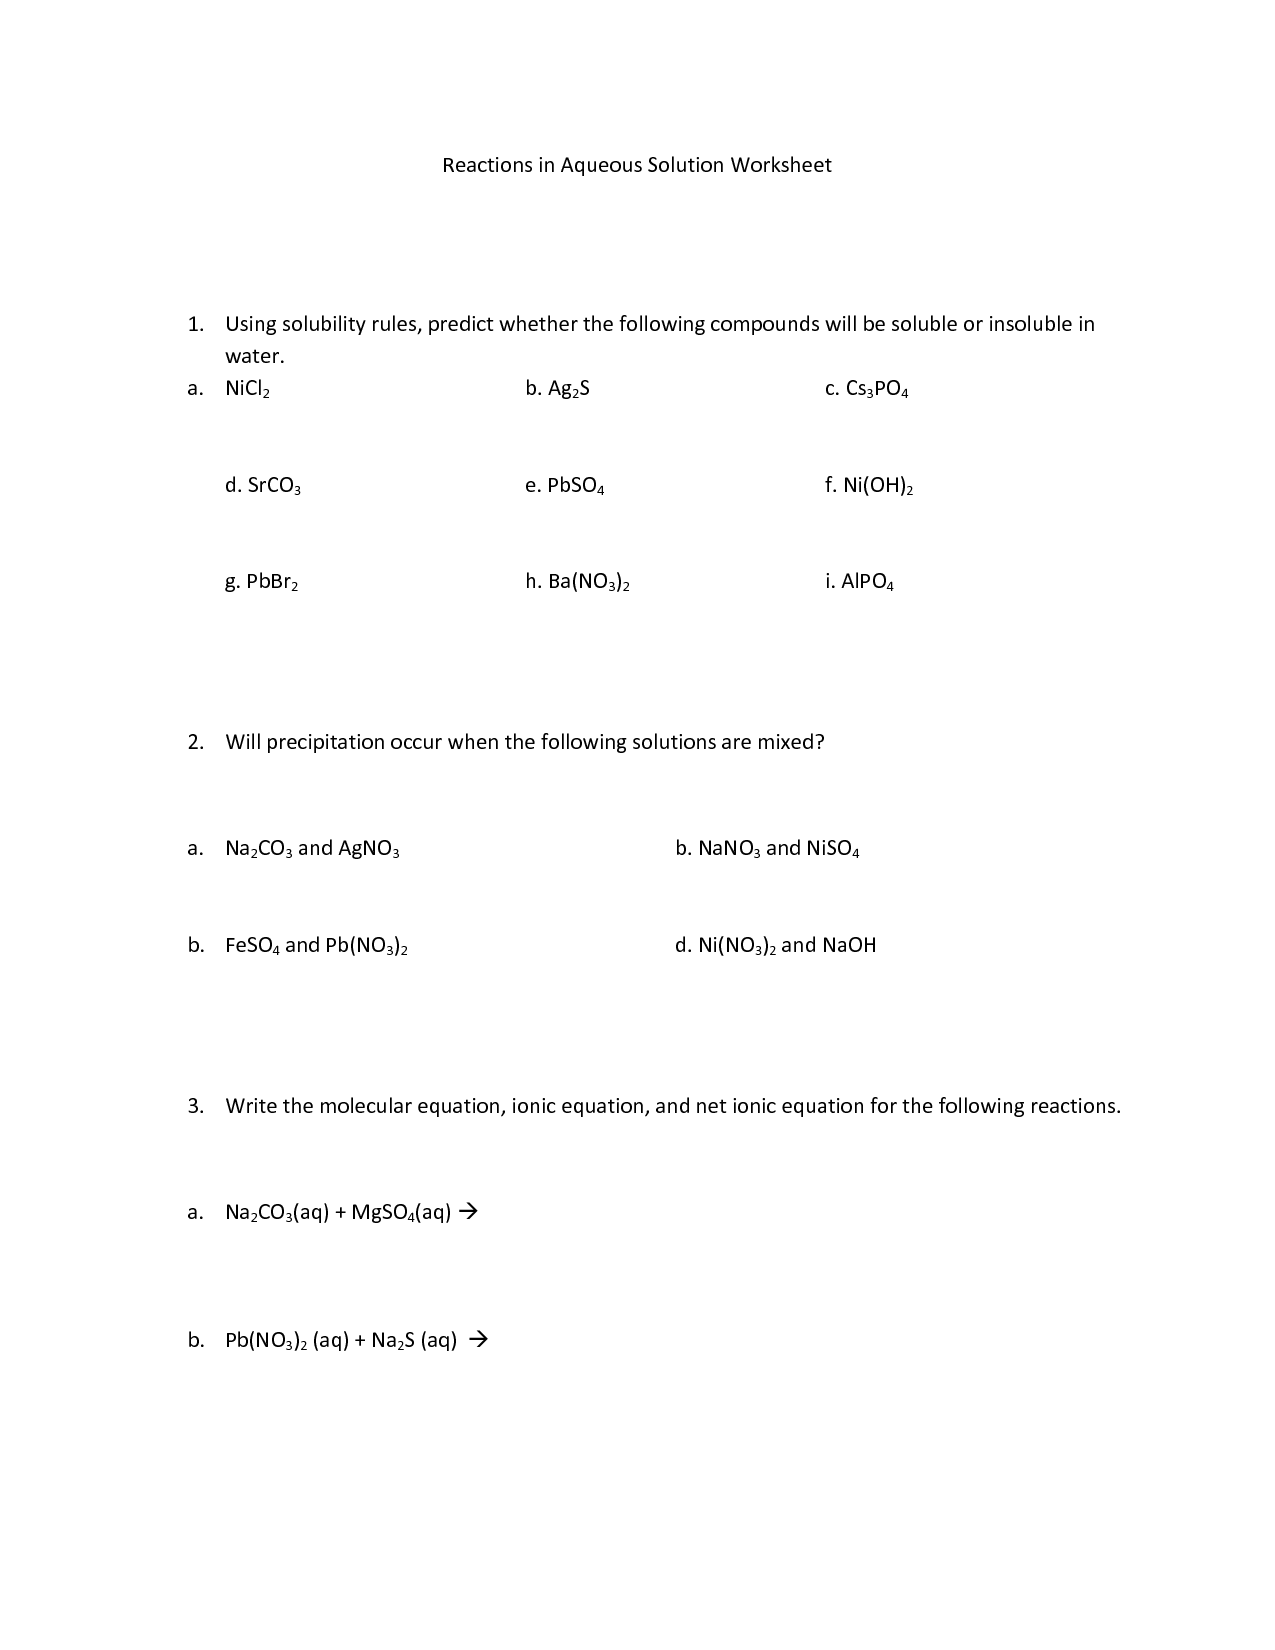 Reactions in Aqueous Solutions Worksheet